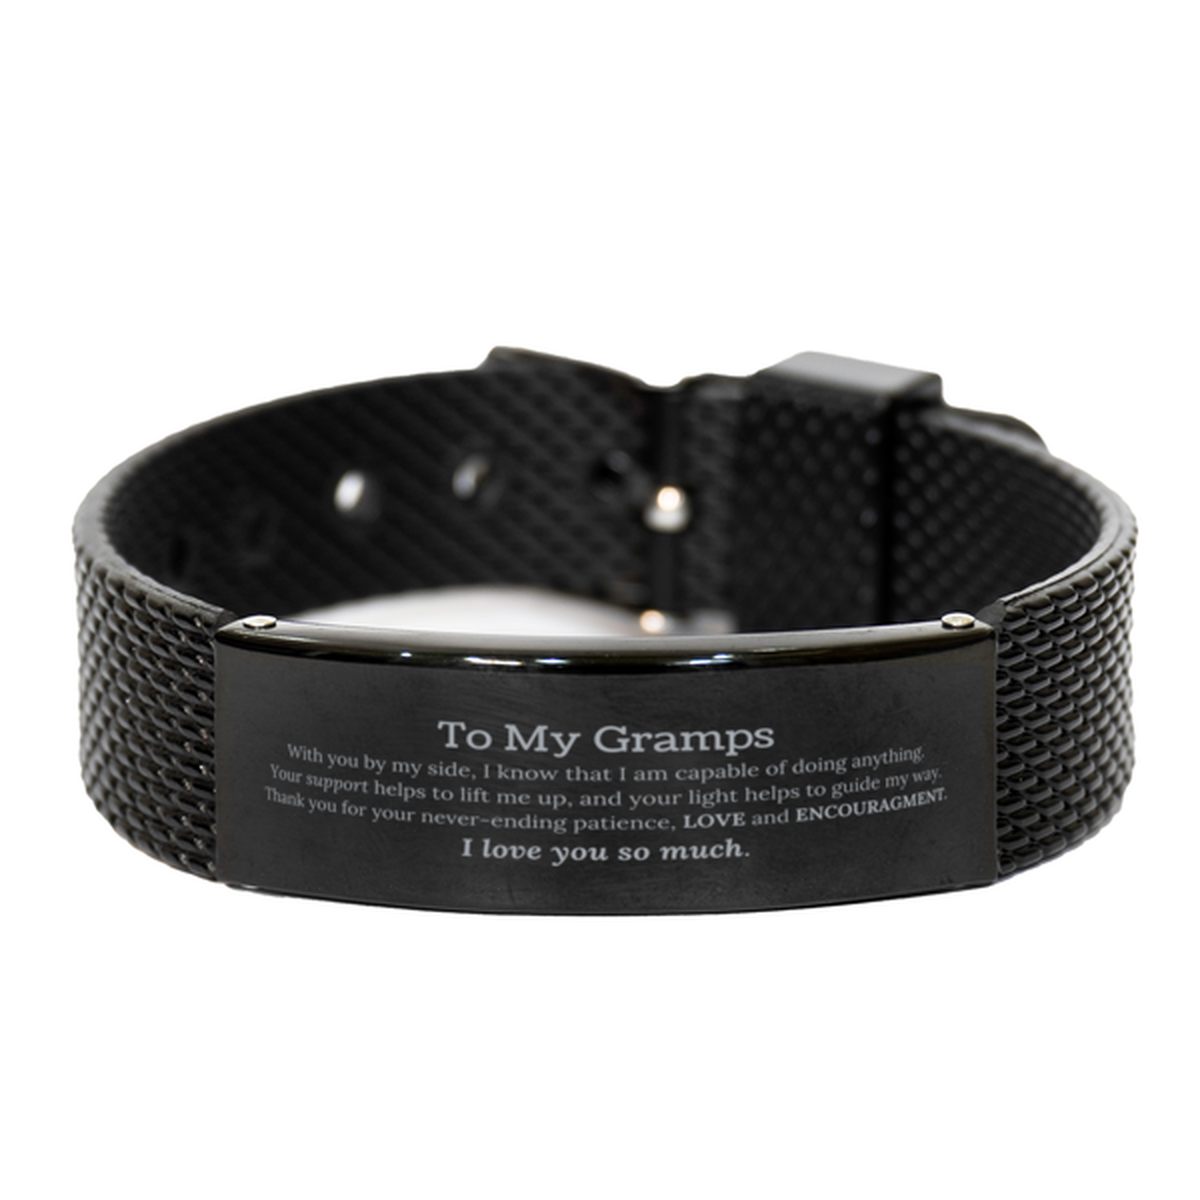 Appreciation Gramps Black Shark Mesh Bracelet Gifts, To My Gramps Birthday Christmas Wedding Keepsake Gifts for Gramps With you by my side, I know that I am capable of doing anything. I love you so much